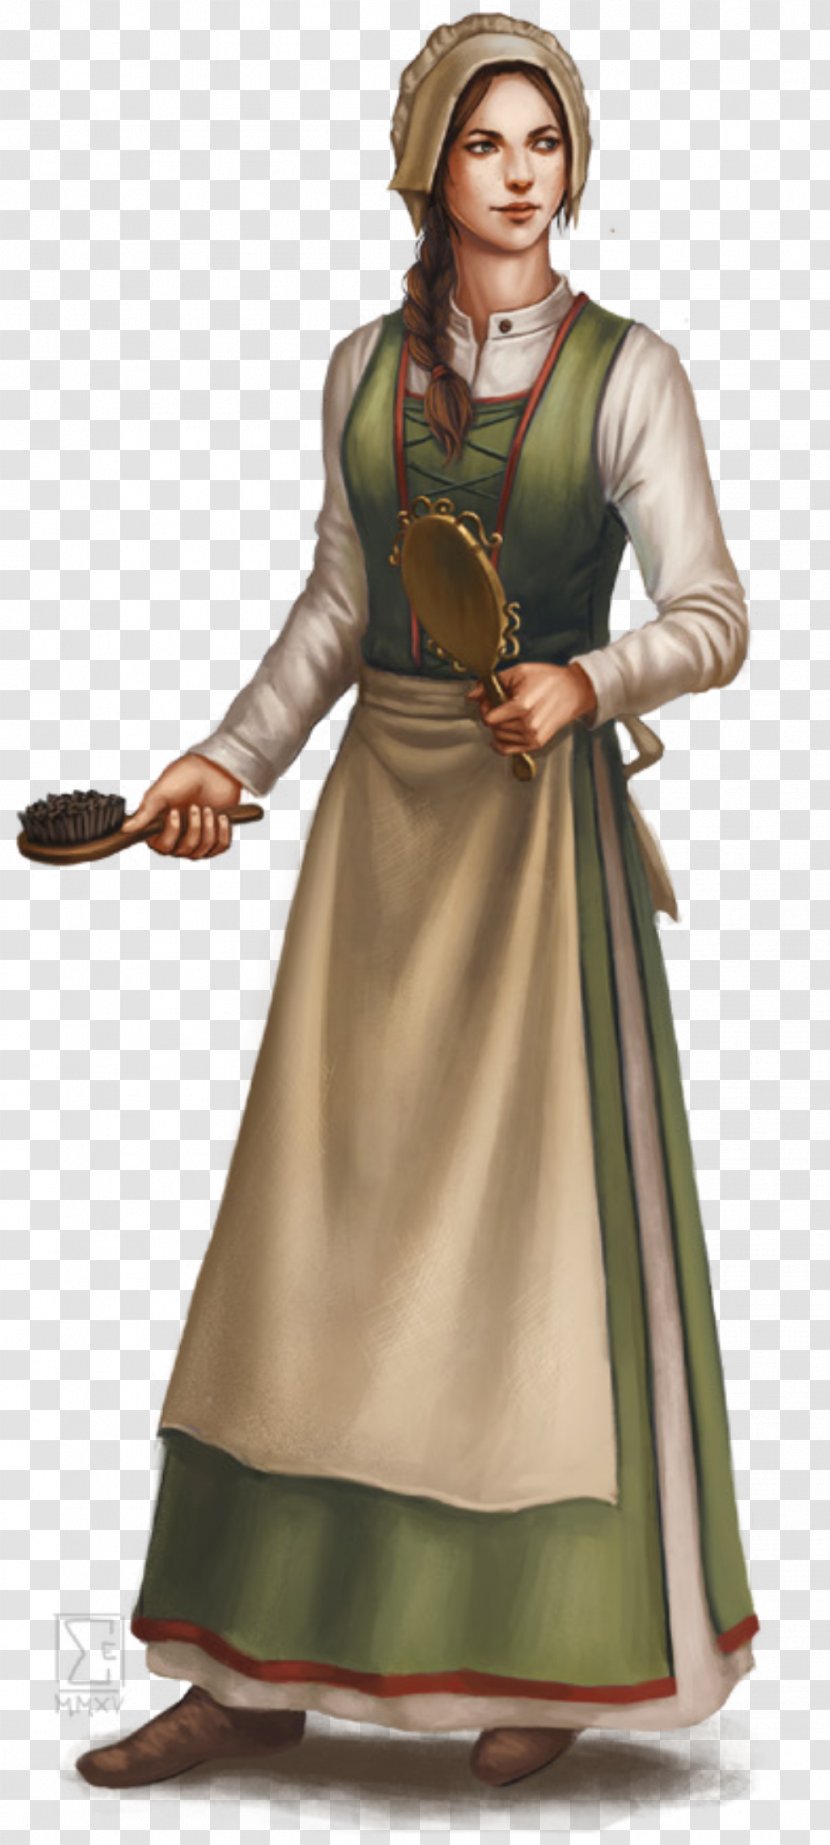 Pathfinder Roleplaying Game Dungeons & Dragons Character Woman Role-playing - Rpg Wallpaper Transparent PNG